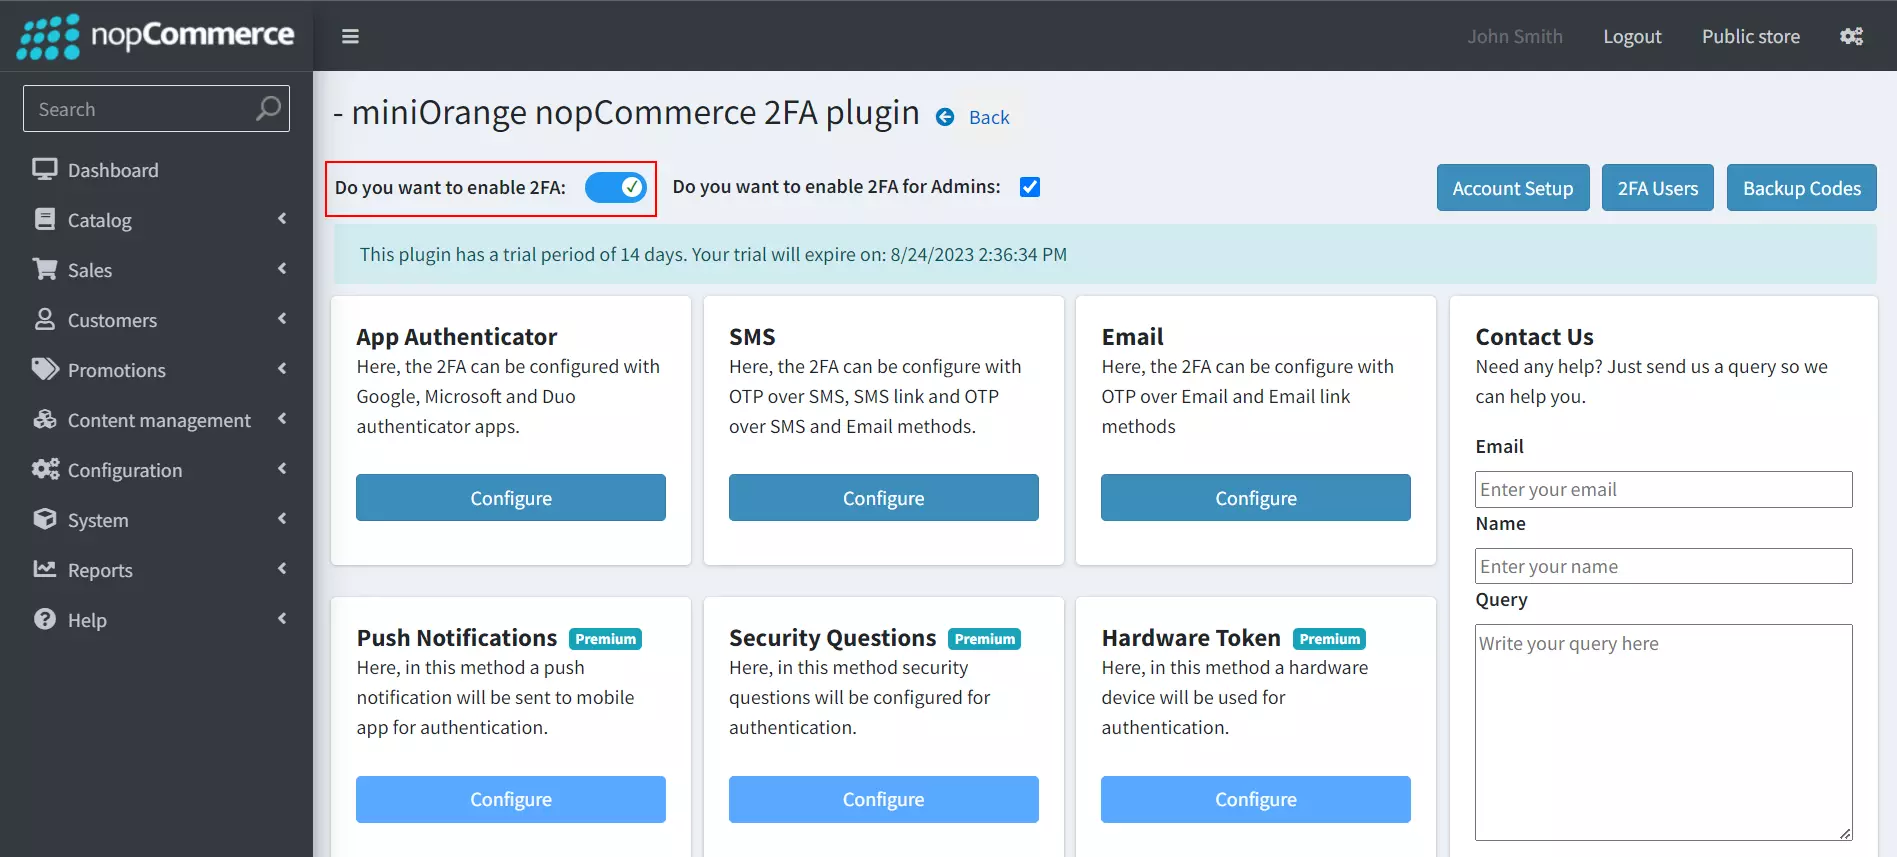 nopCommerce Two-factor Authentication using OTP over SMS | nopCommerce 2FA - Enable nopCommerce 2FA for users